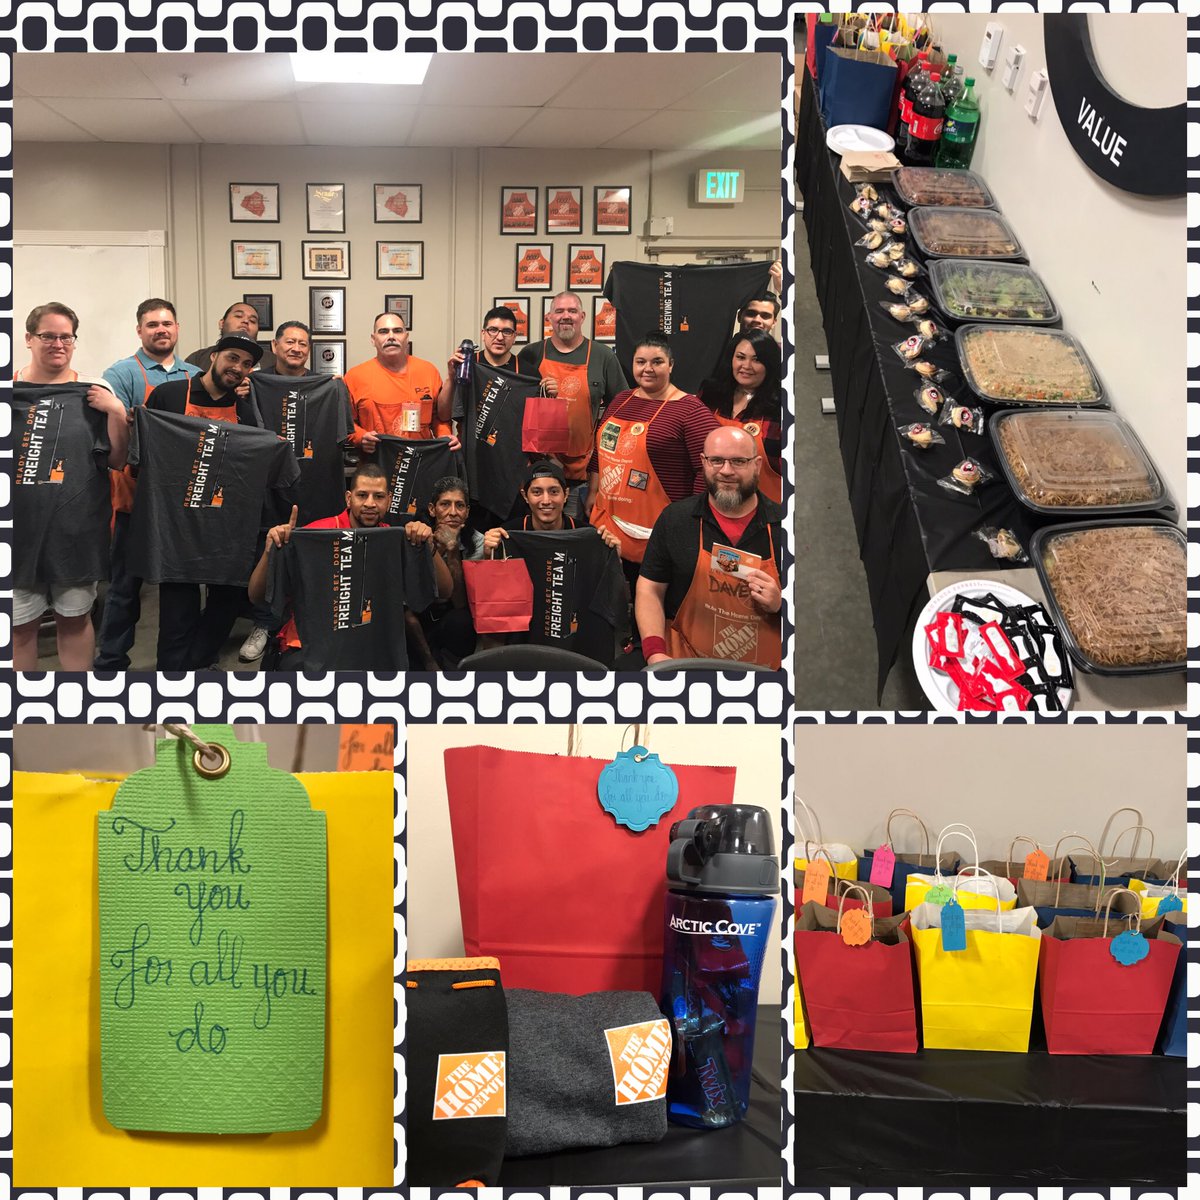 Spending time saying Thank You to our Freight Team!! Success starts with this team!! #SmoothOperations #freightappreciation#PacNorthProud